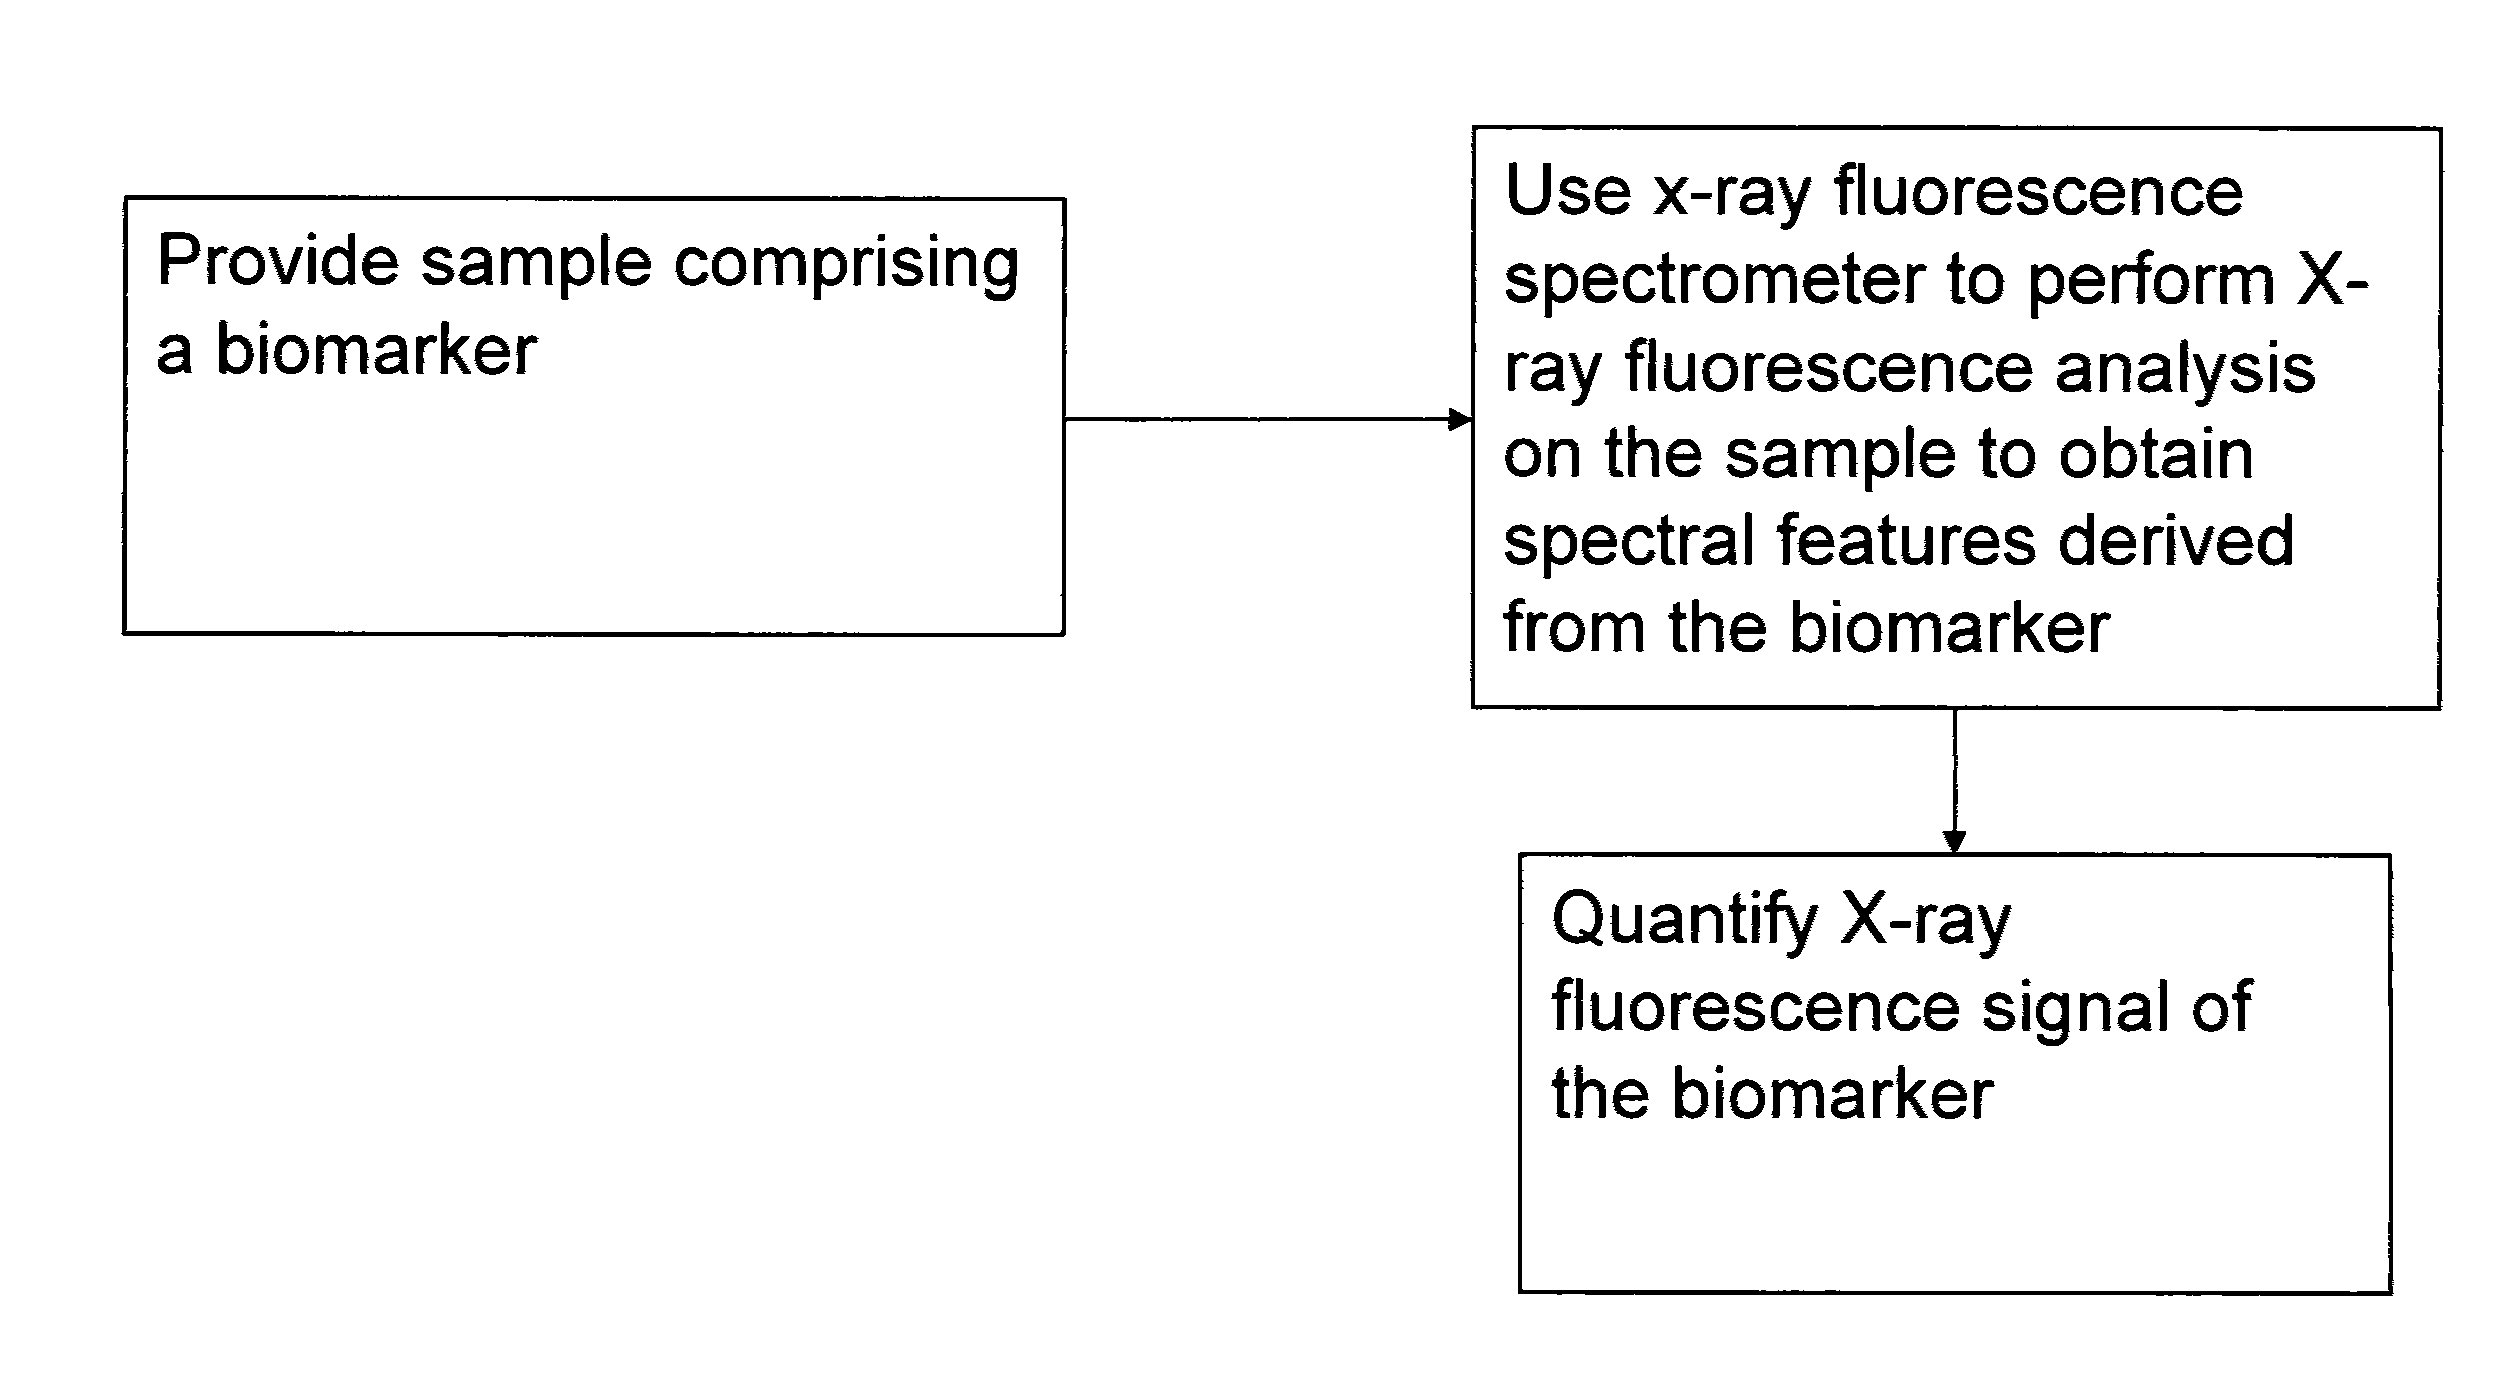 Method for analysis using x-ray fluorescence